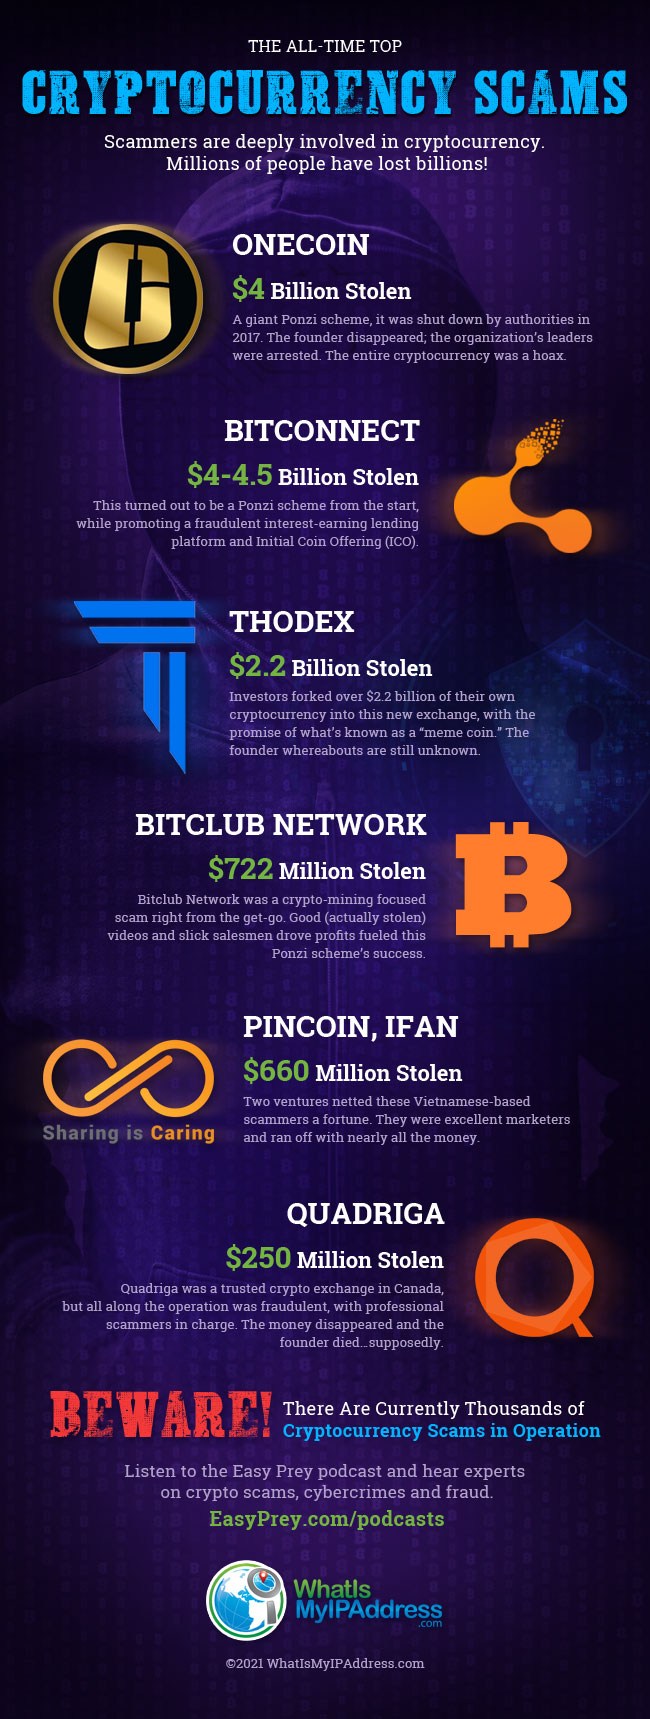 The all-time top cryptocurrency scams. Scammers are deeply involved in cryptocurrency. Millions of people have lost billions!